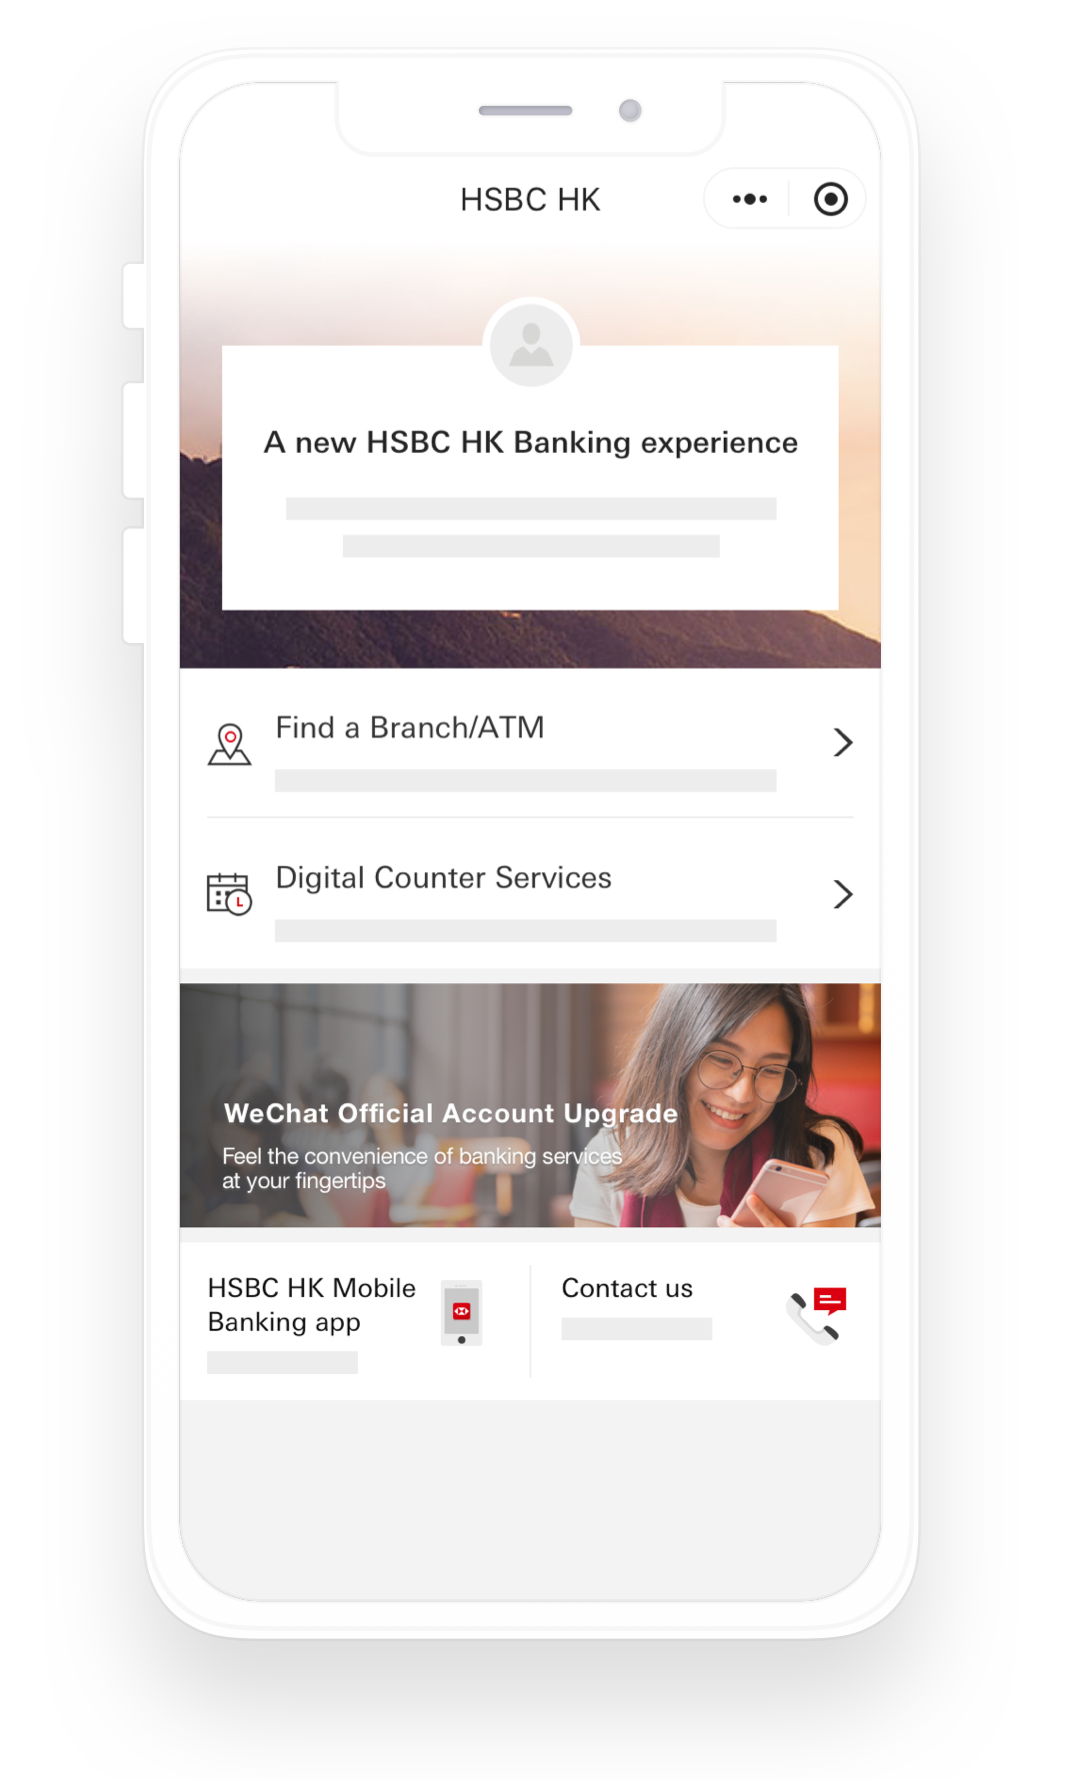 Screenshot of the interface of HSBC Hong Kong WeChat mini programme; image used for the HSBC Hong Kong WeChat page.